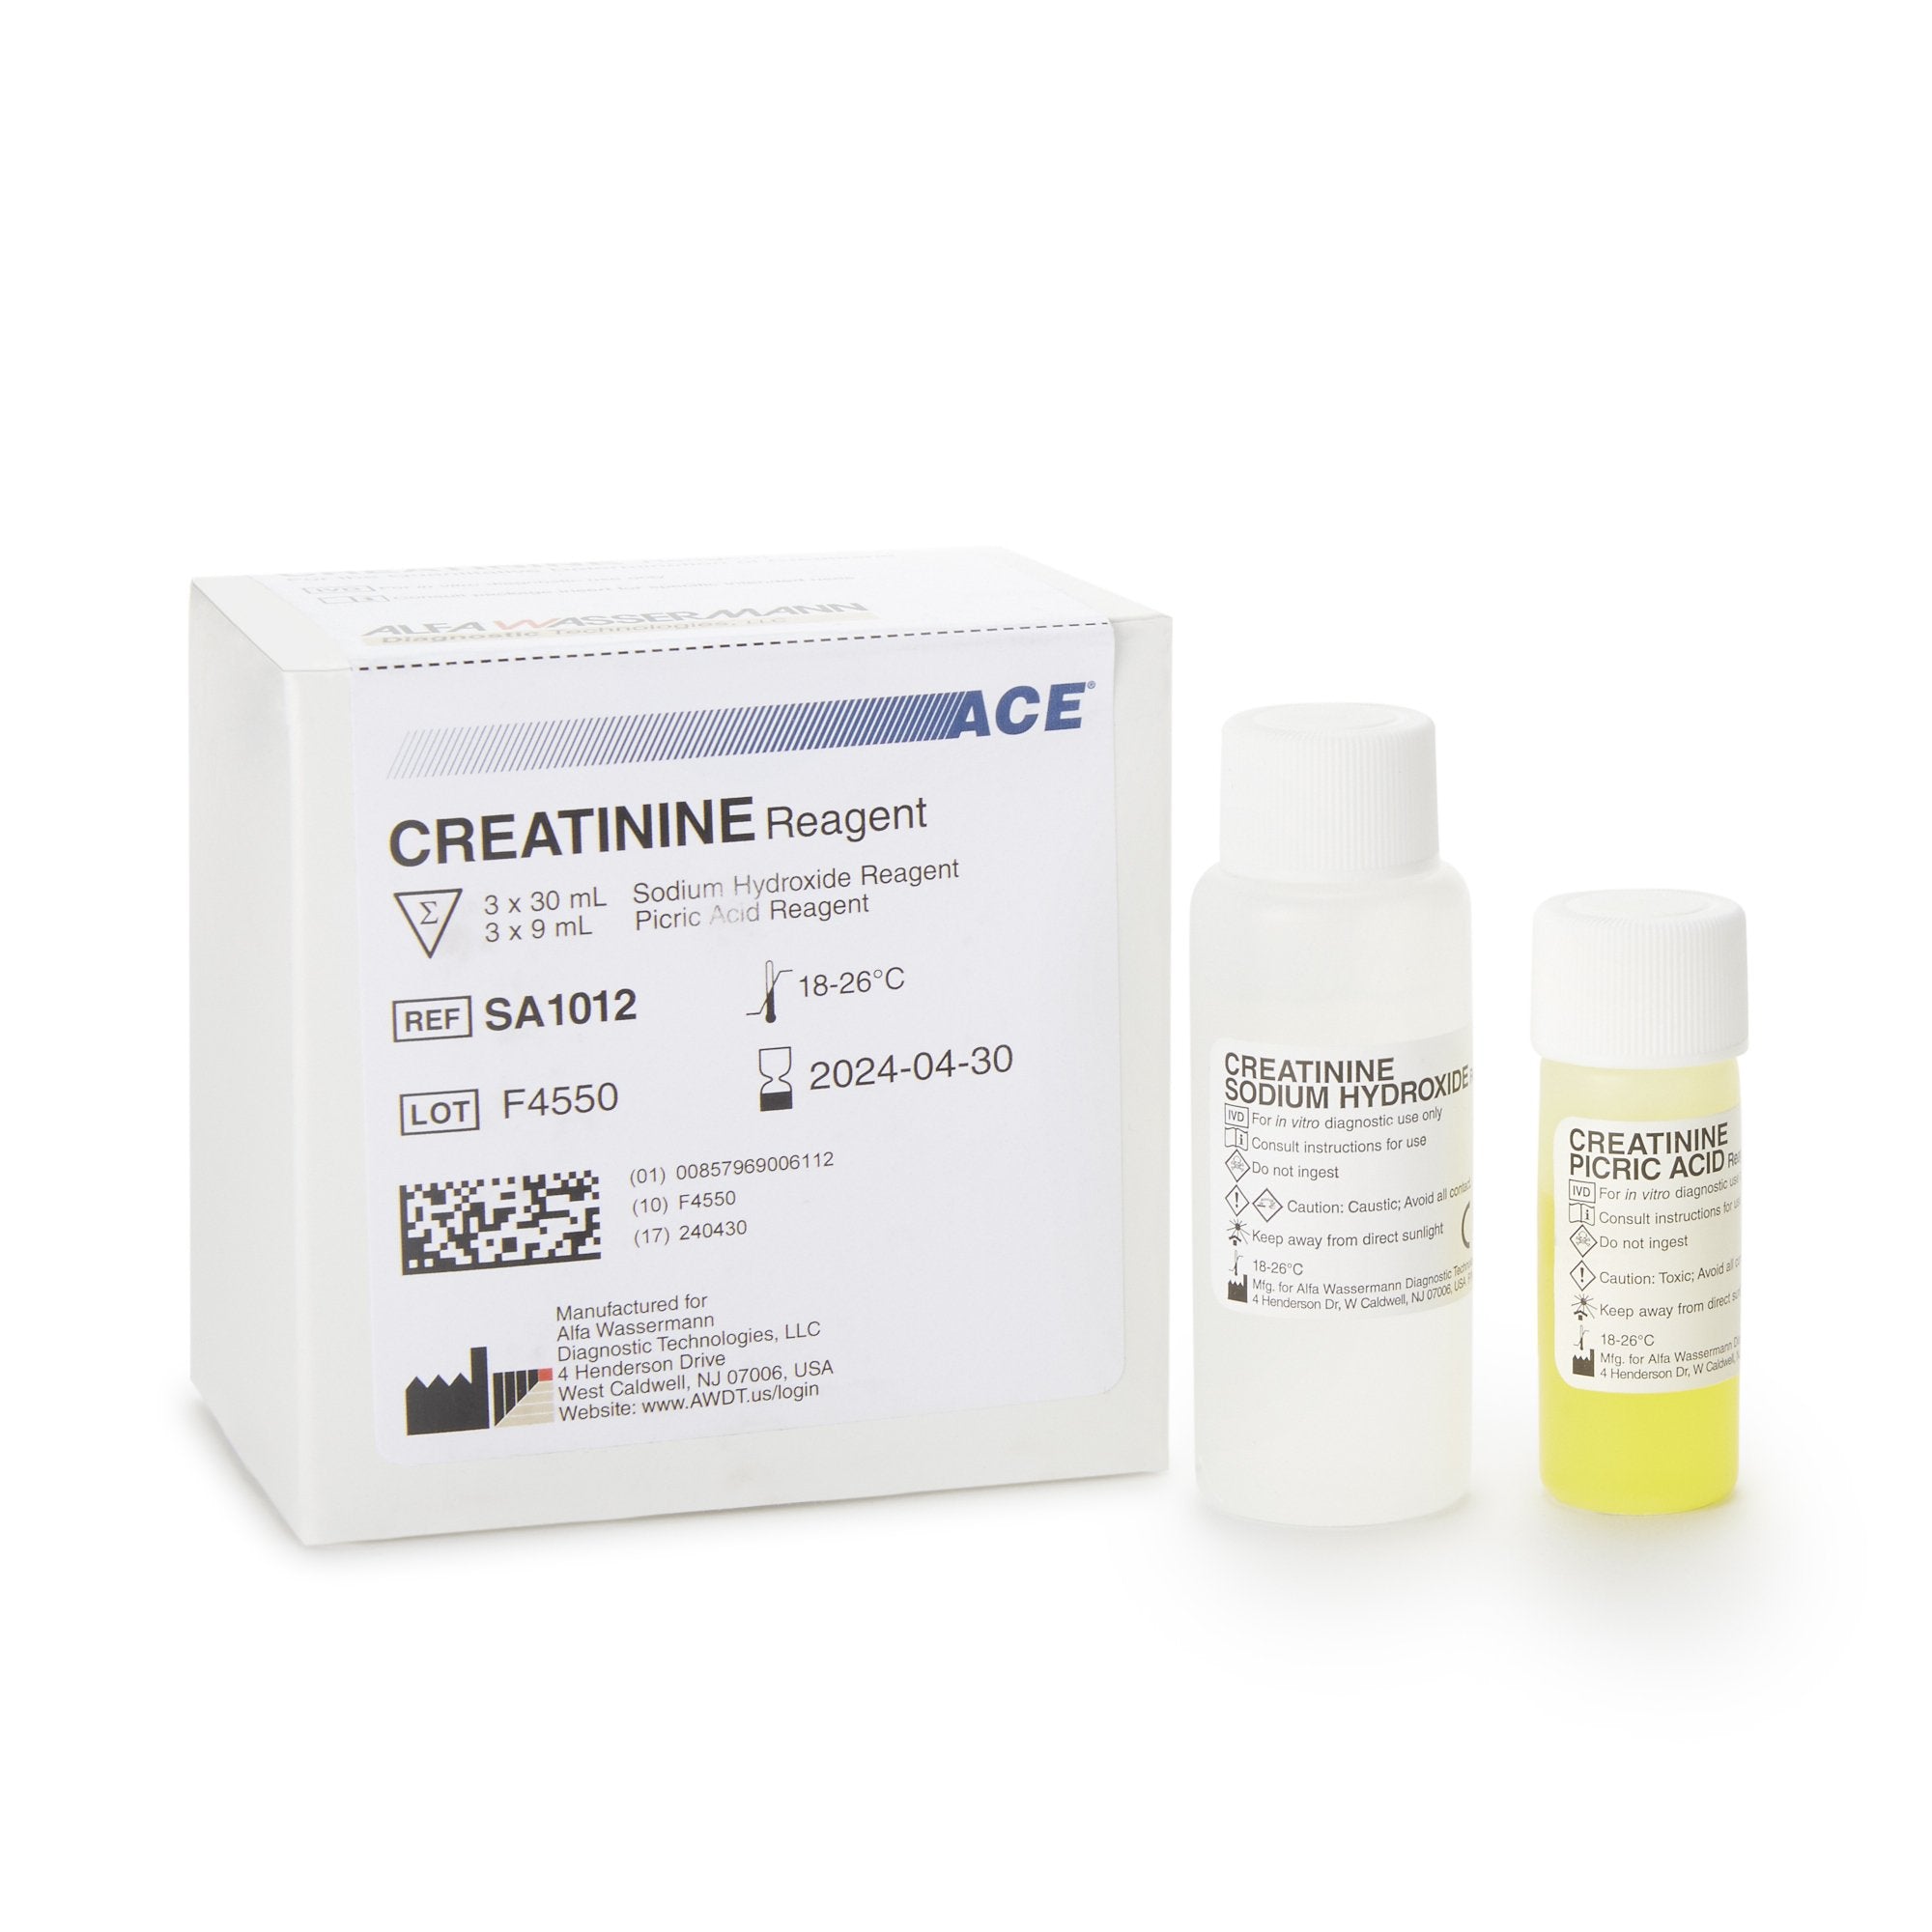 Reagent ACE Renal / General Chemistry Creatinine For ACE and ACE Alera Analyzers 560 Tests R1: 3 X 30 mL, R2: 3 X 9 mL